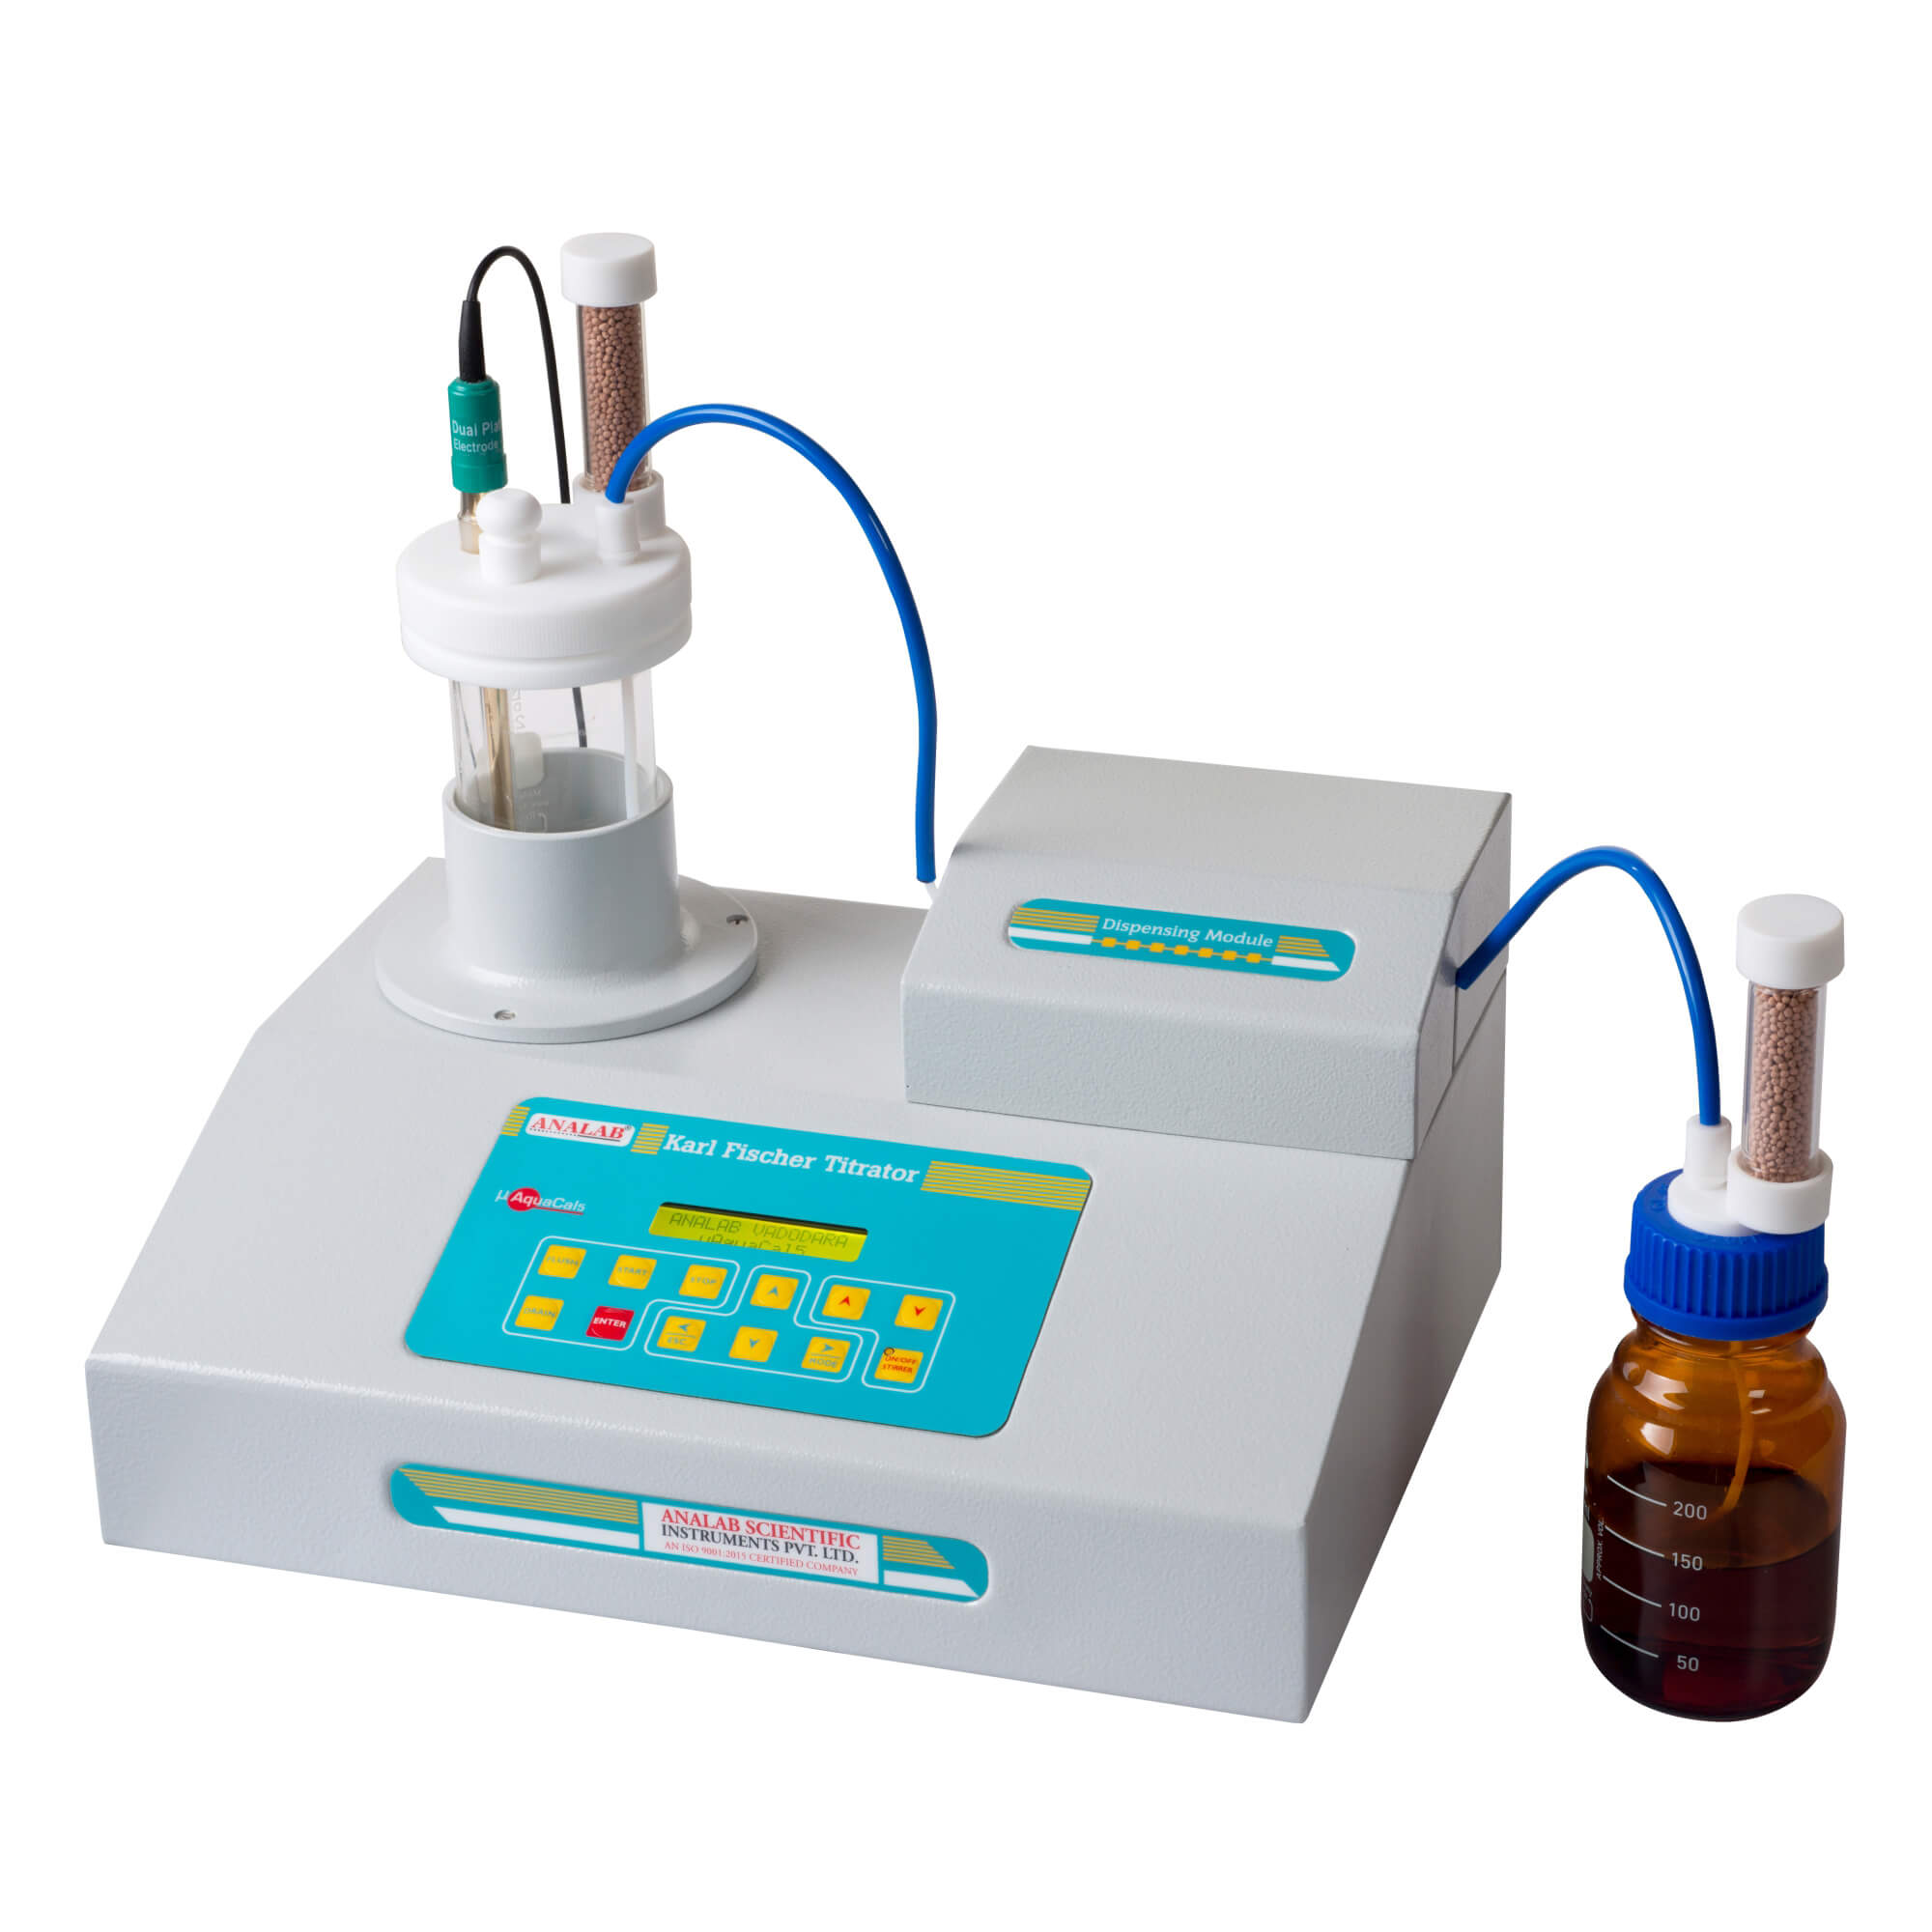 Microcontroller Based Karl Fischer Titrator Manufacturer in India